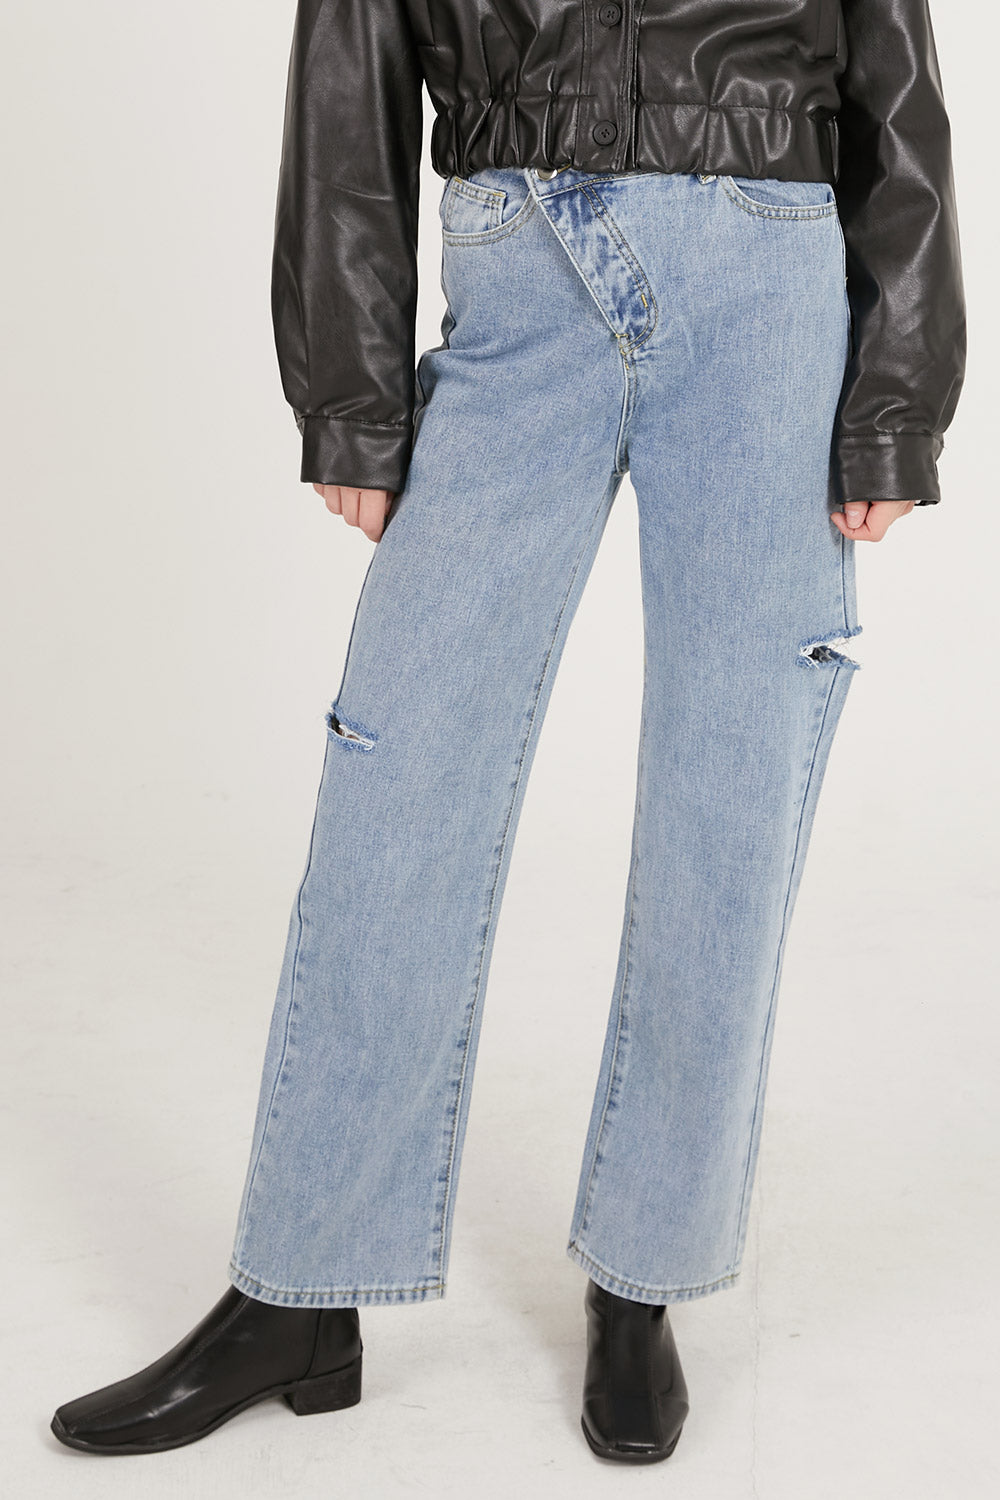 Ariana Wrap Front Fly Jeans | Women's Denims